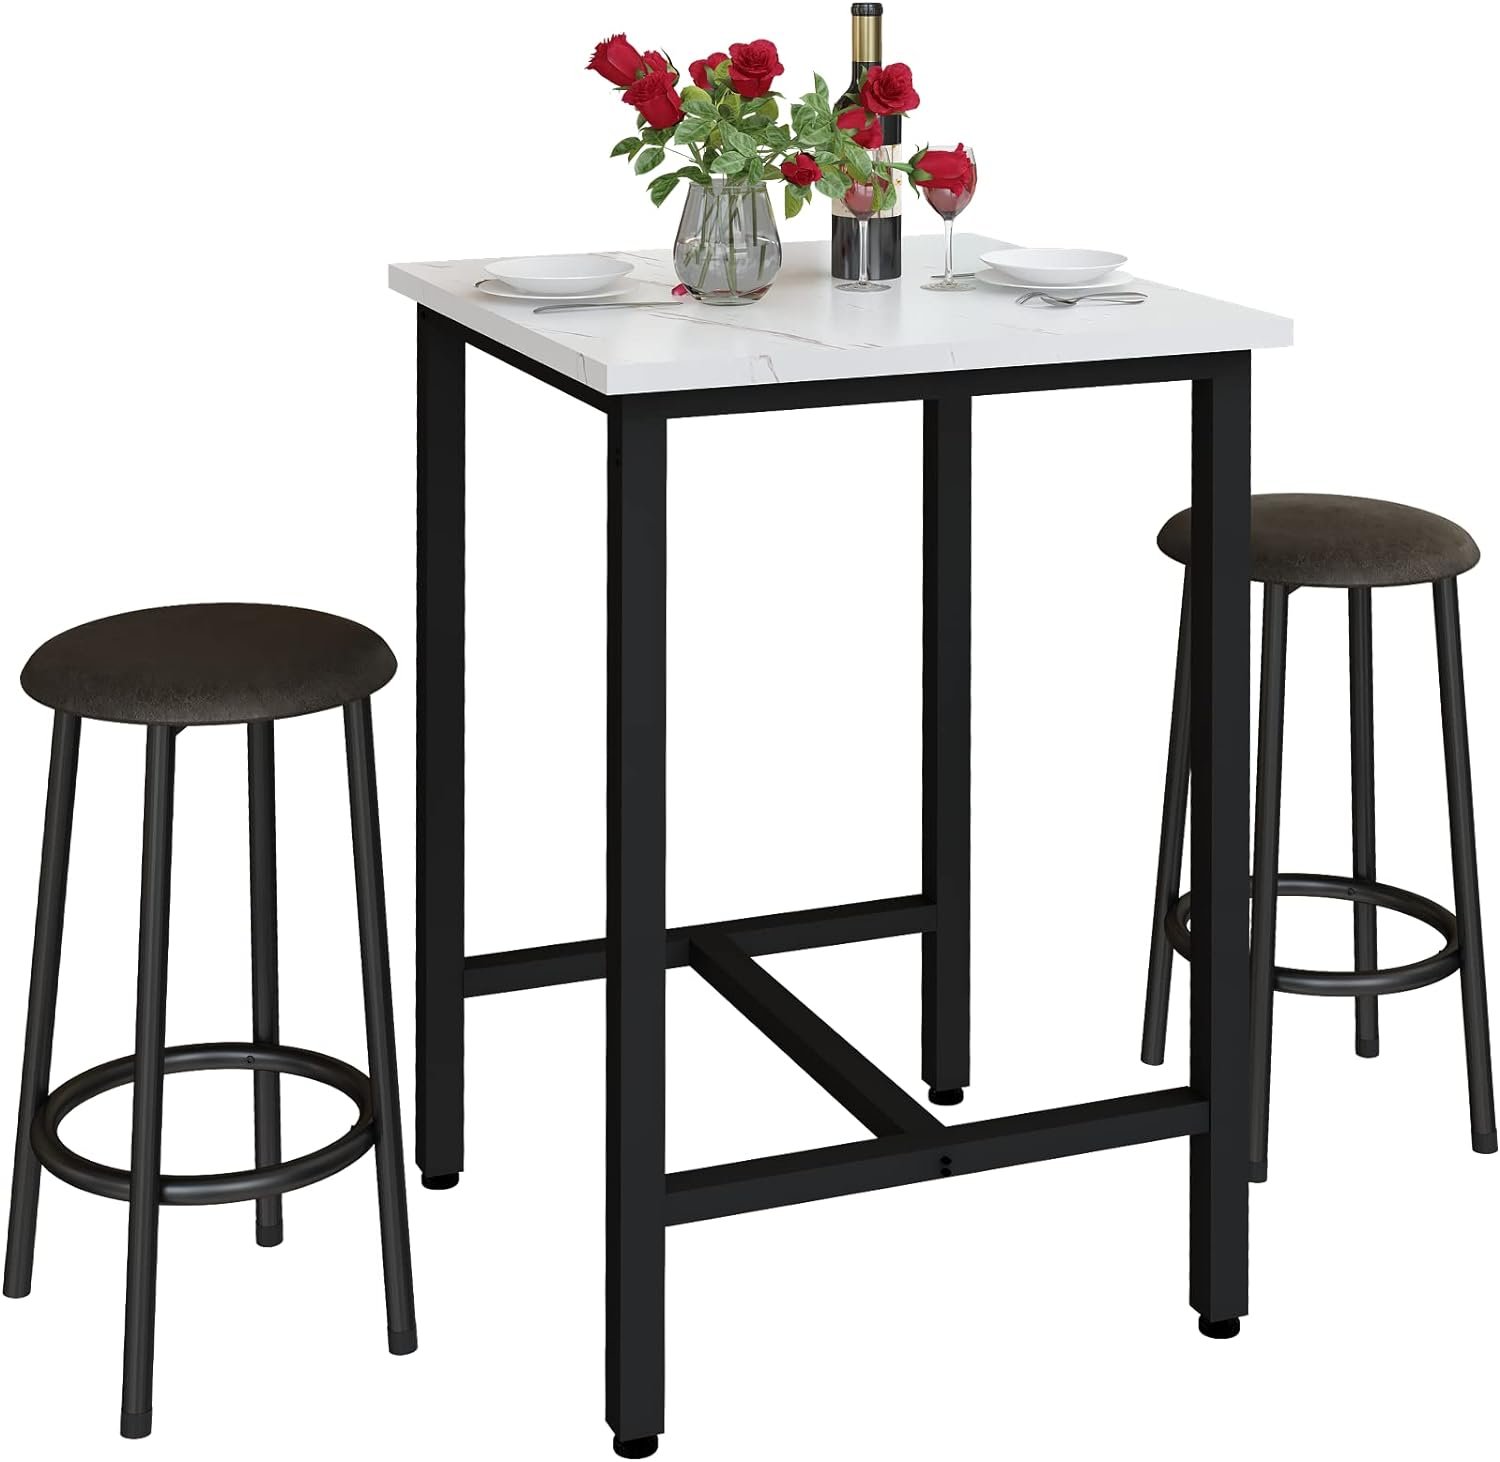 Bar Table and Chairs Set